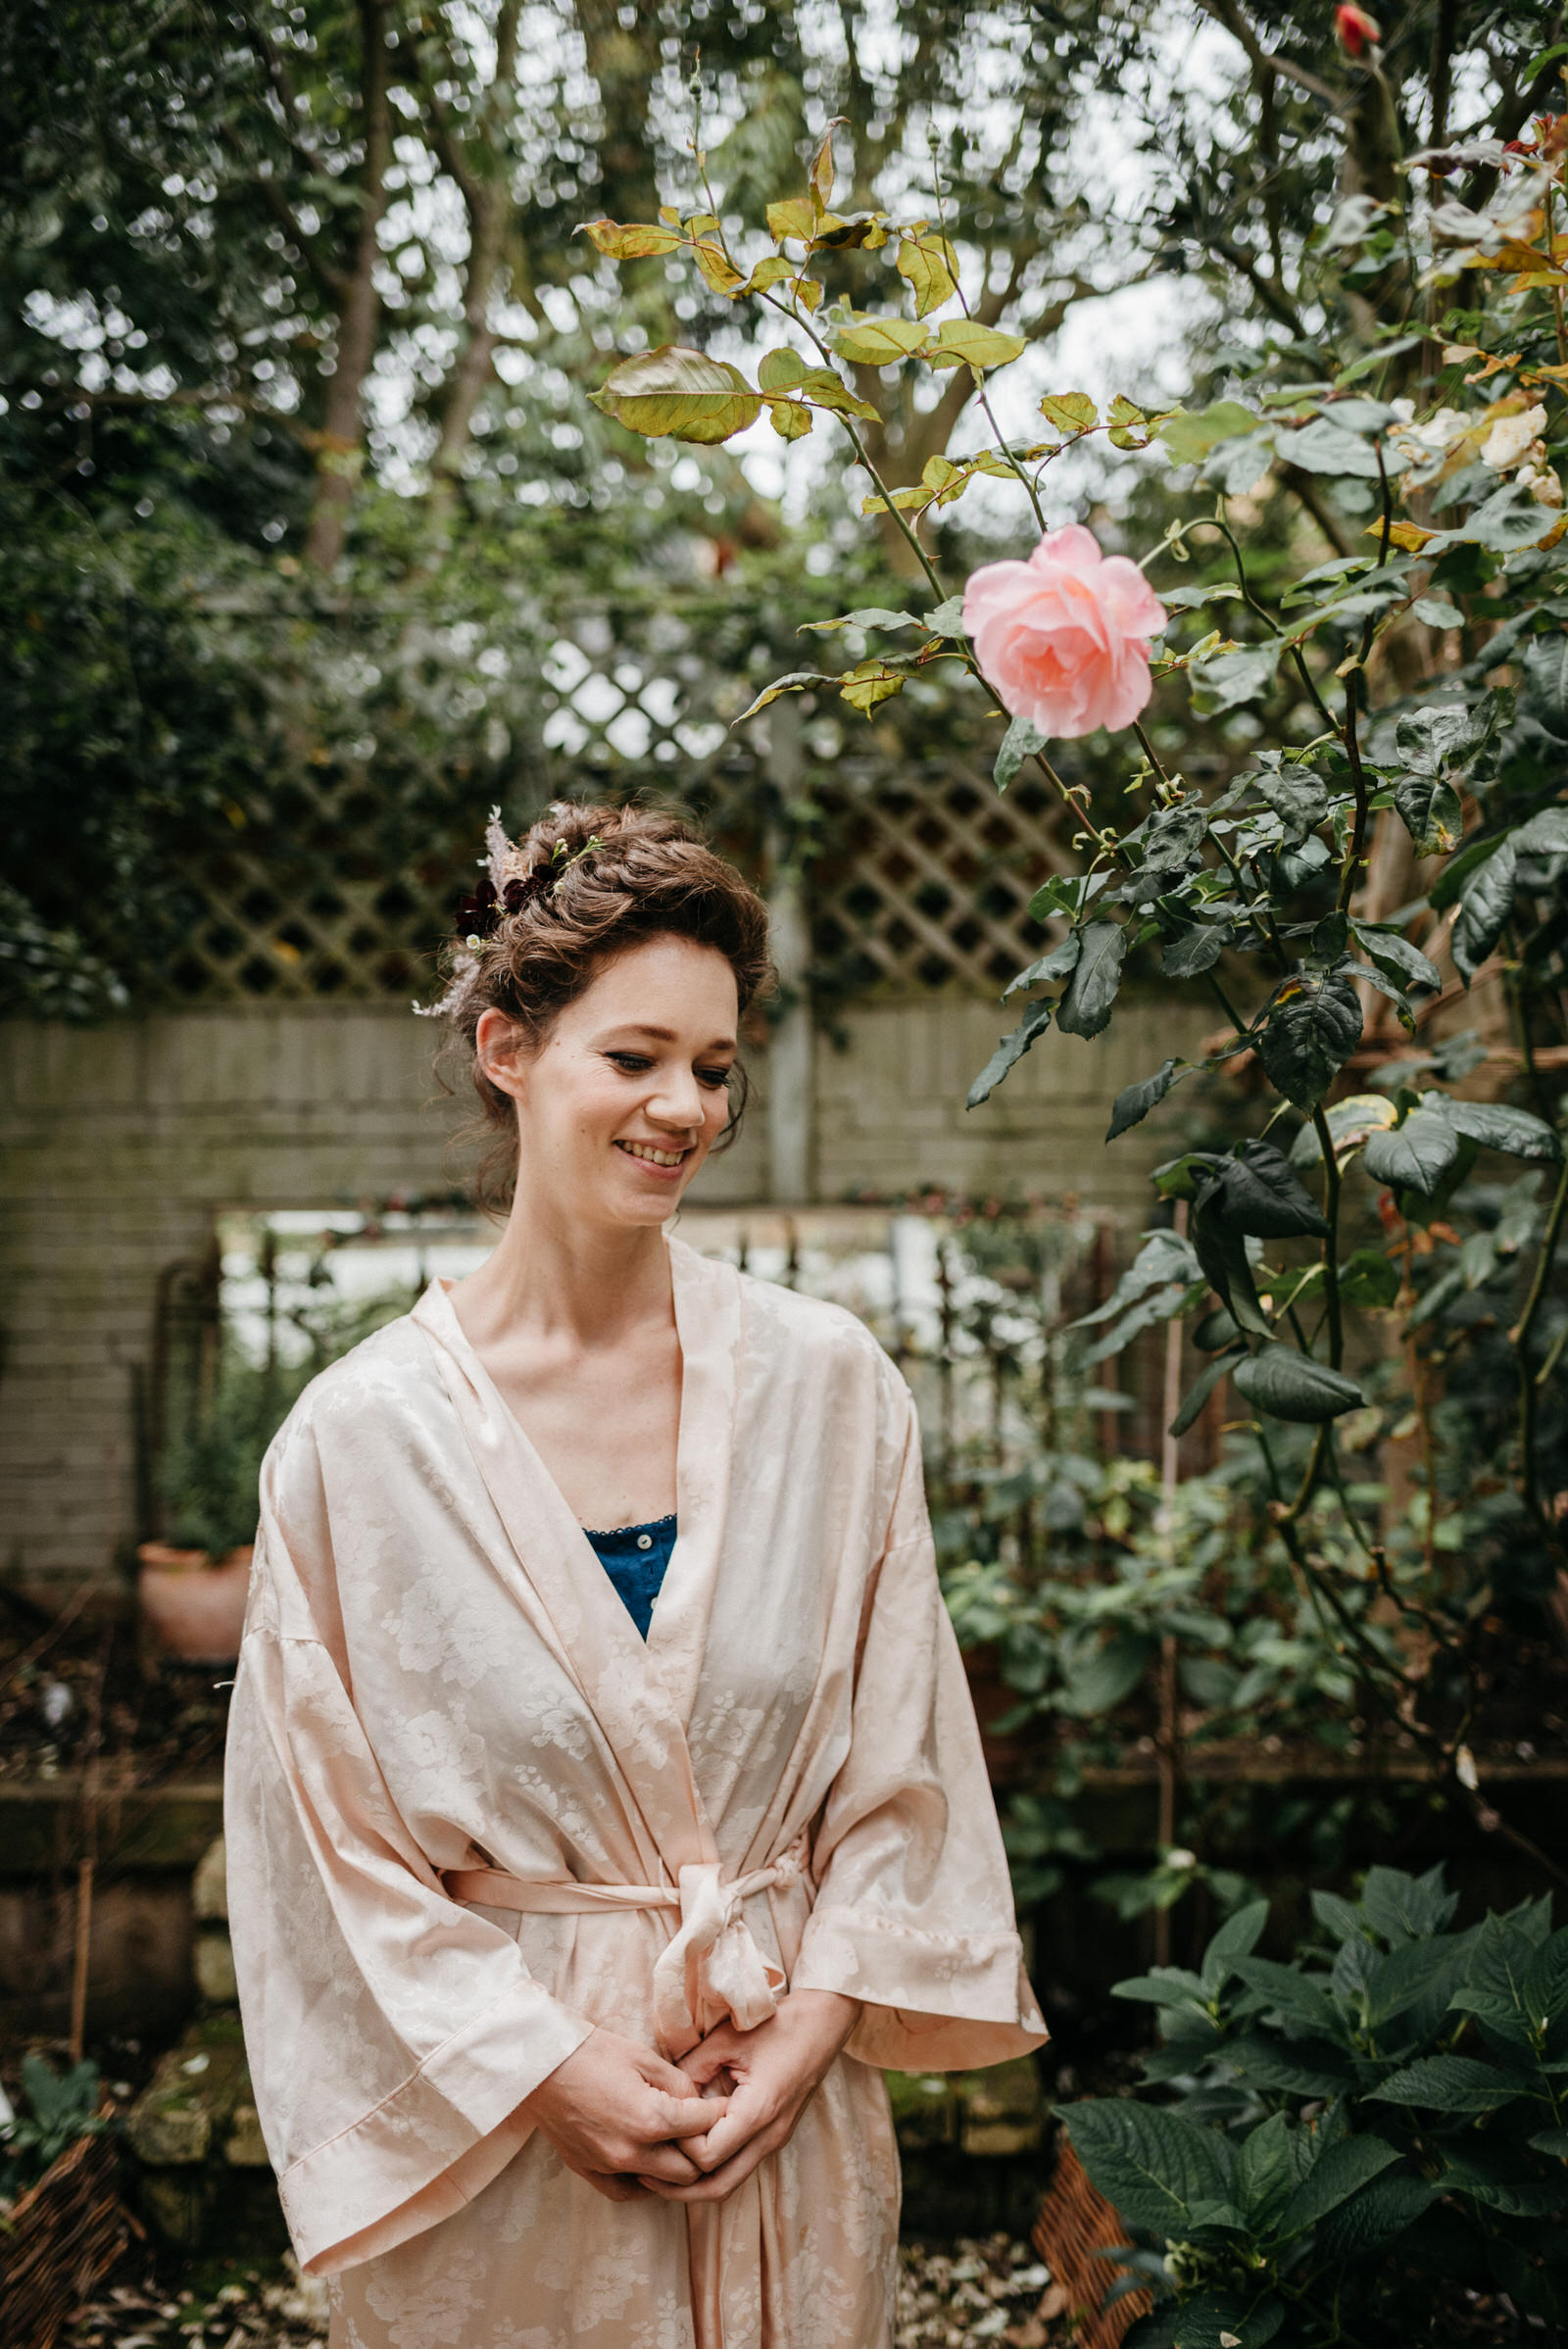 portrait of London bride in garden with pale pink rose wearing pale pink kimono